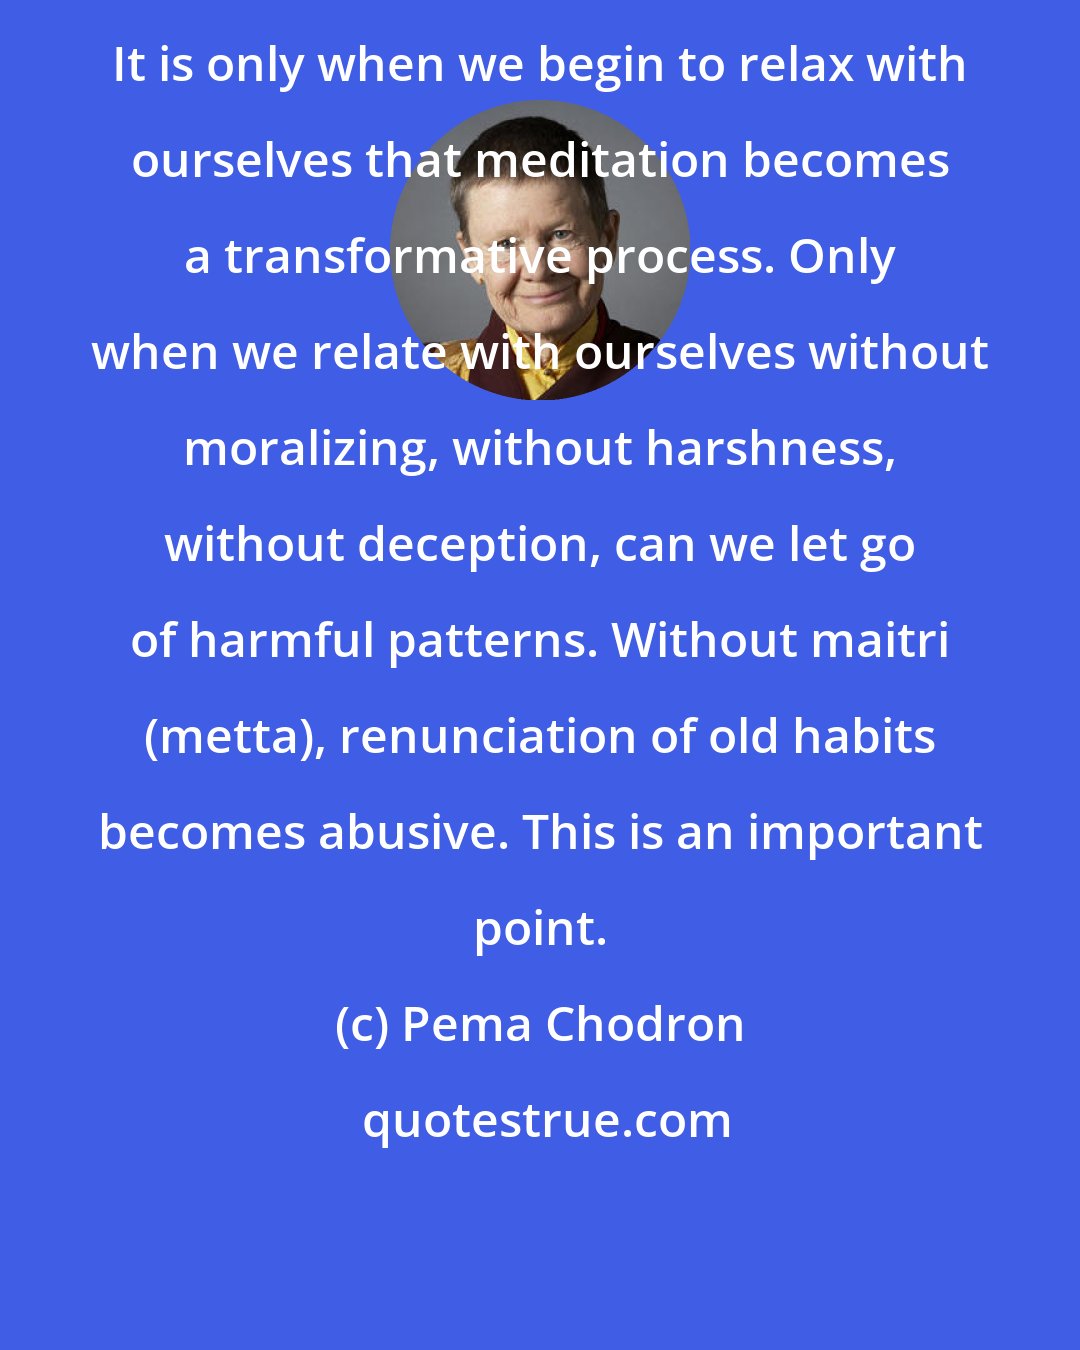 Pema Chodron: It is only when we begin to relax with ourselves that meditation becomes a transformative process. Only when we relate with ourselves without moralizing, without harshness, without deception, can we let go of harmful patterns. Without maitri (metta), renunciation of old habits becomes abusive. This is an important point.